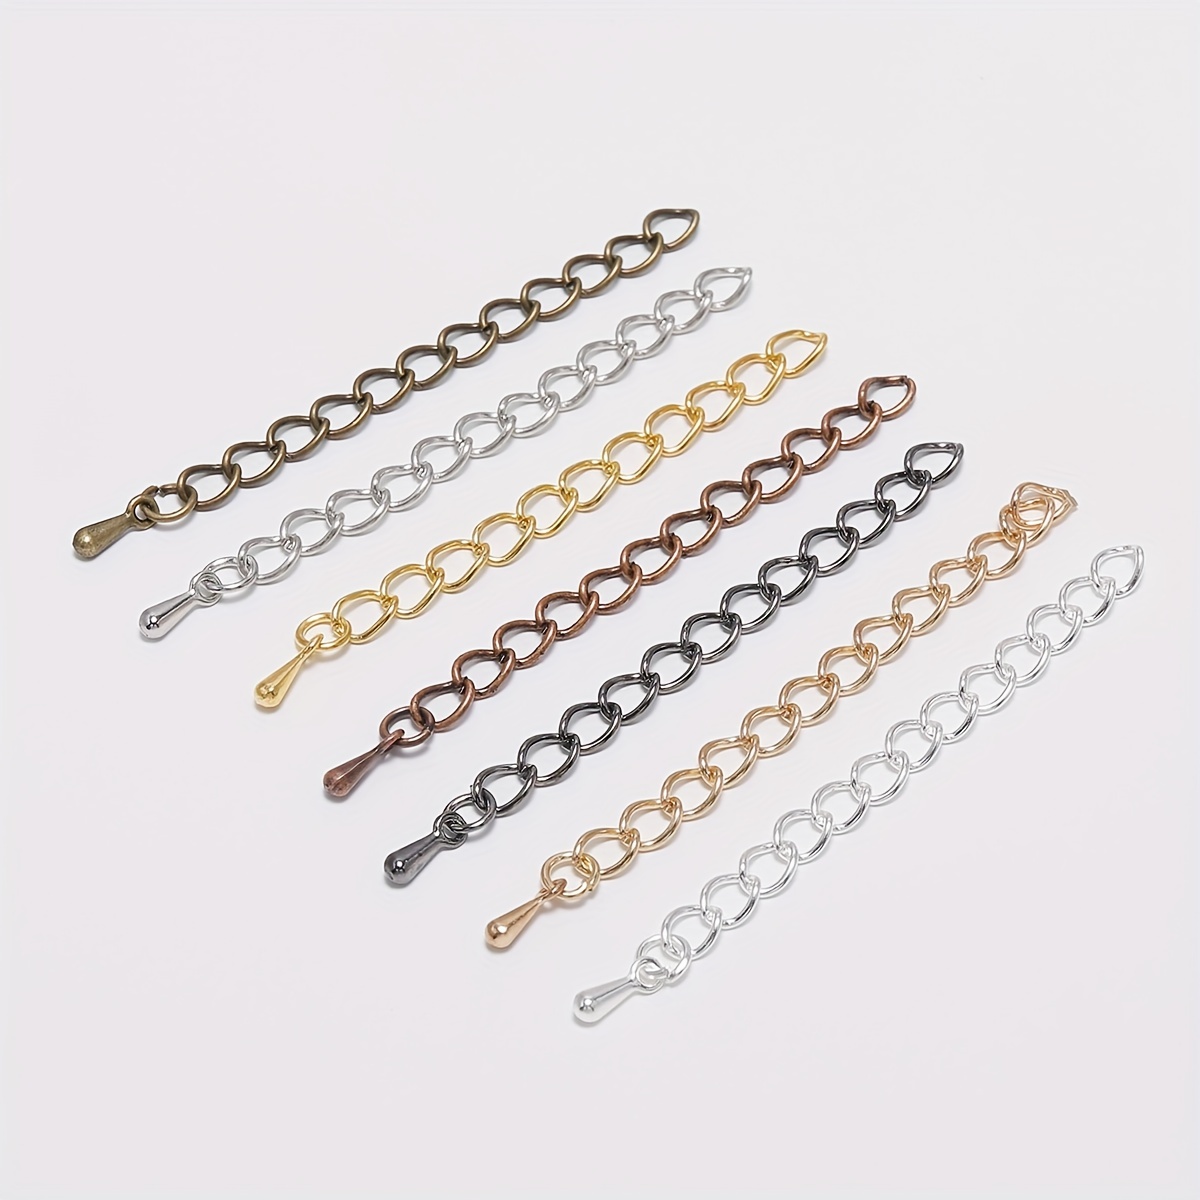  8pcs Copper Plated Chain Extender Necklace Extenders